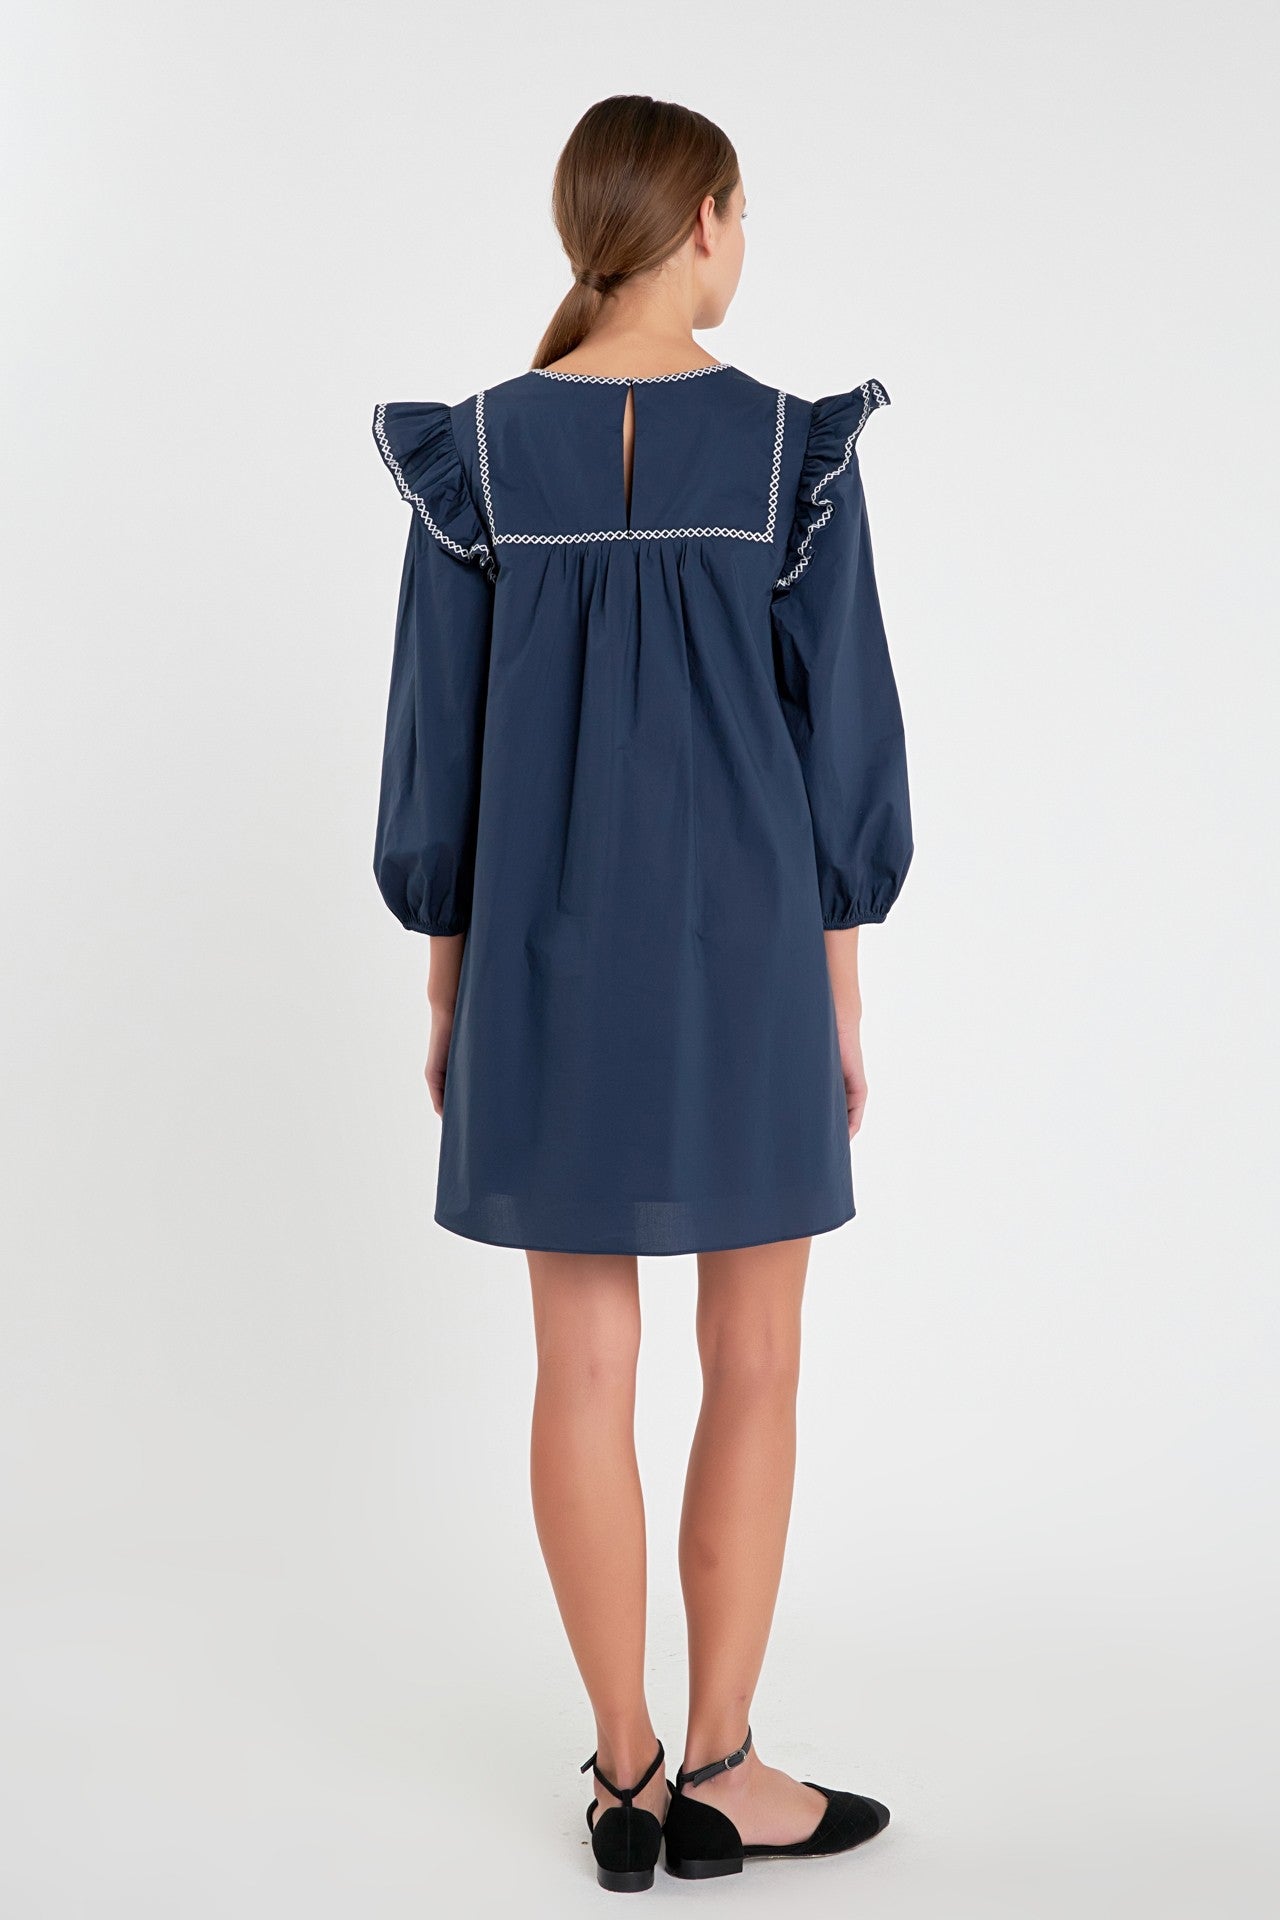 JOSIE CONTRAST EMBROIDERED MINI DRESS IN NAVY & WHITE